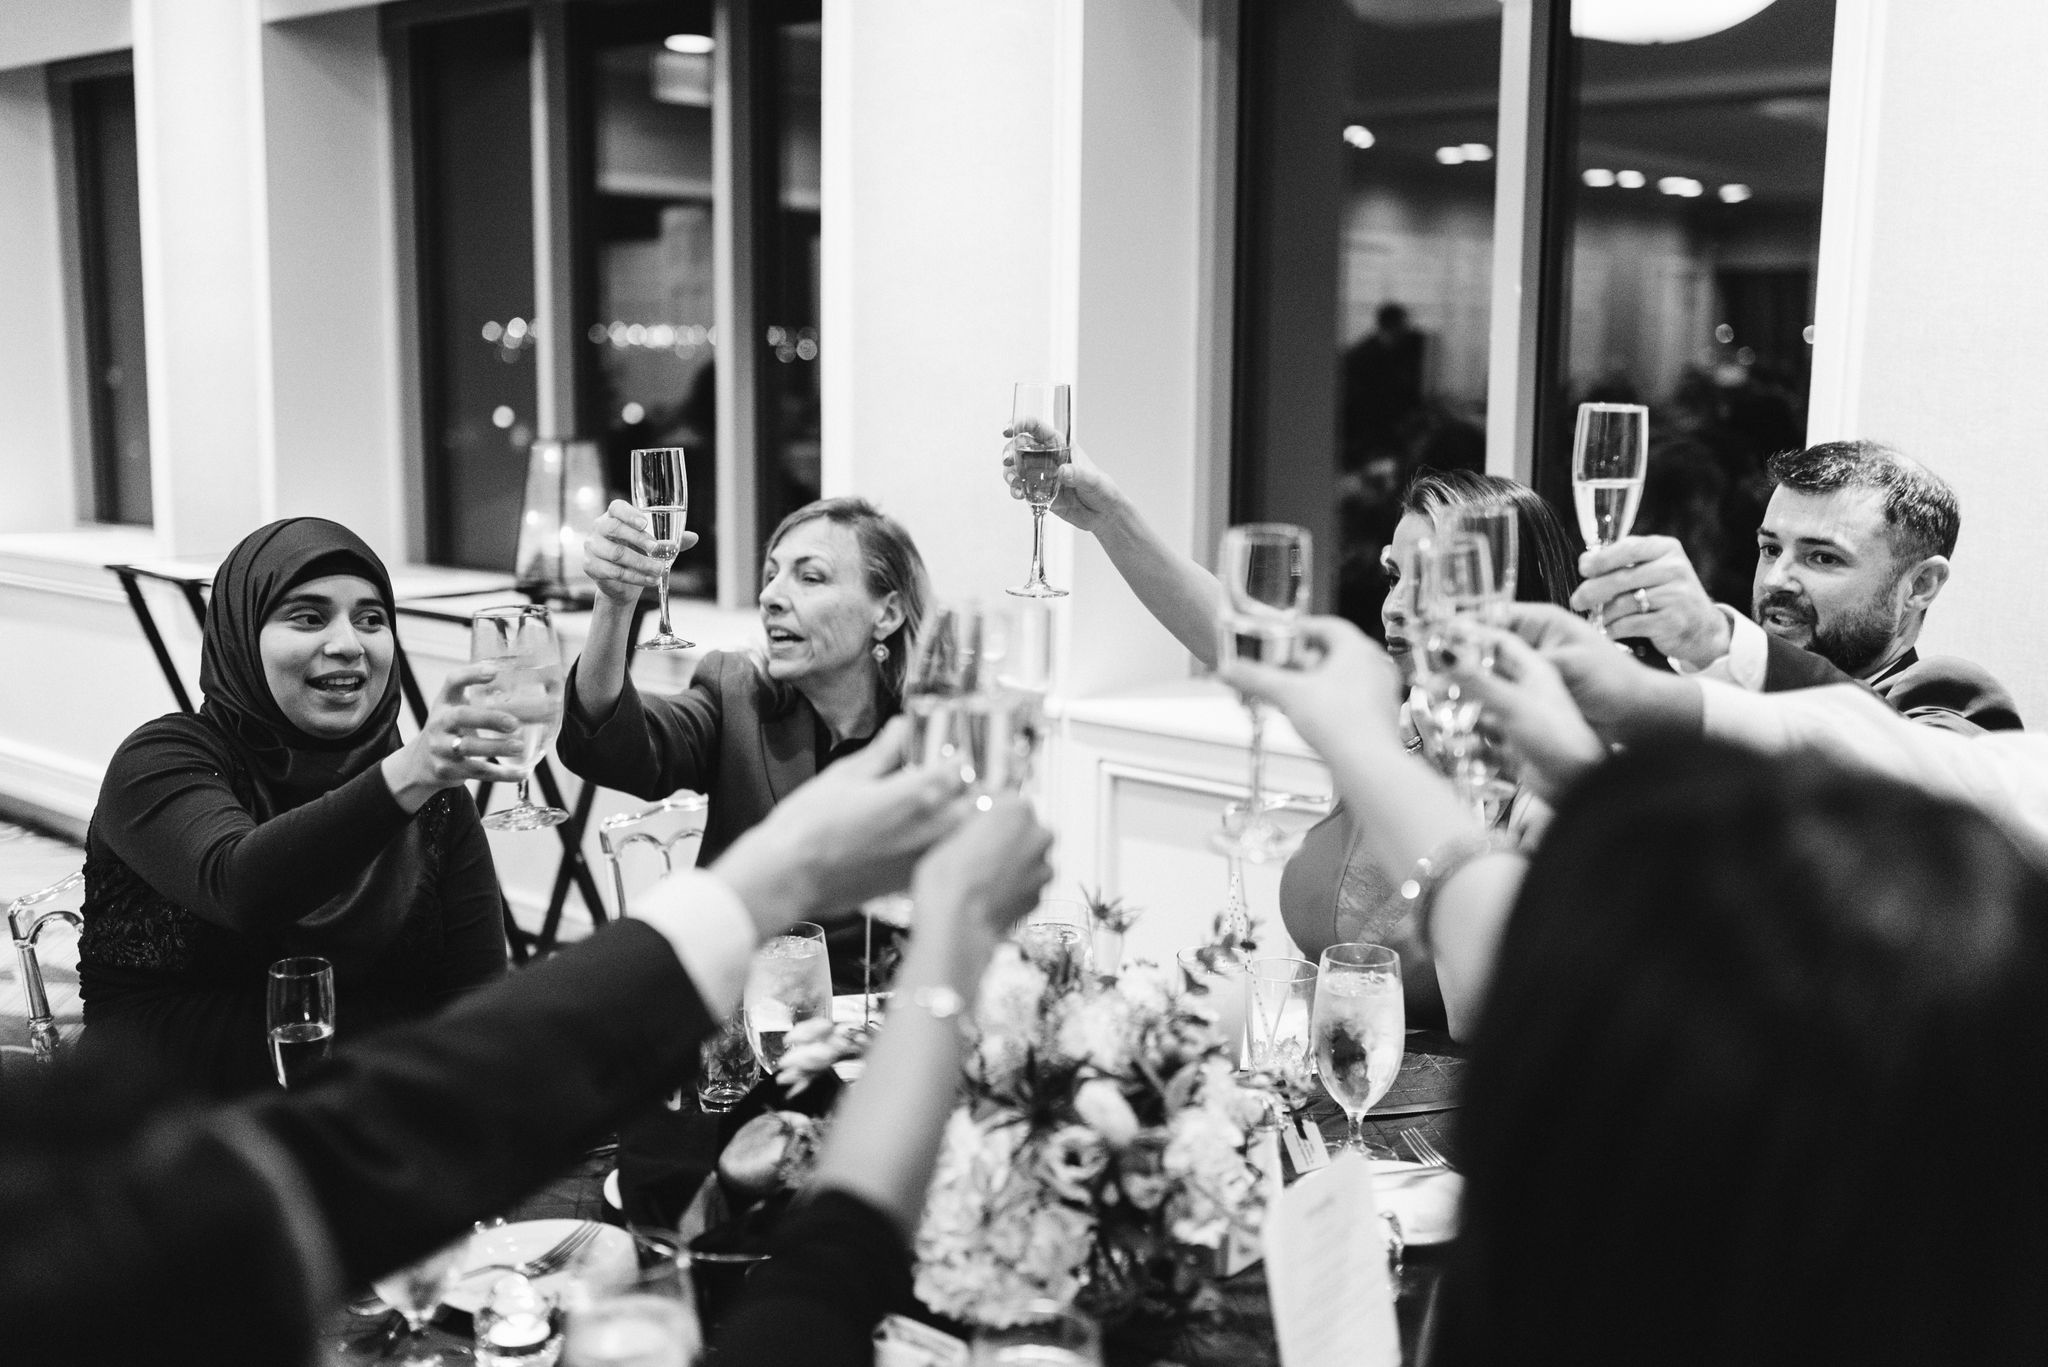  Baltimore, Fells Point, Maryland Wedding Photographer, Winter Wedding, Historic, Classic, Vintage, friends Toasting at Reception, Champagne Toast, Black and White Photo 